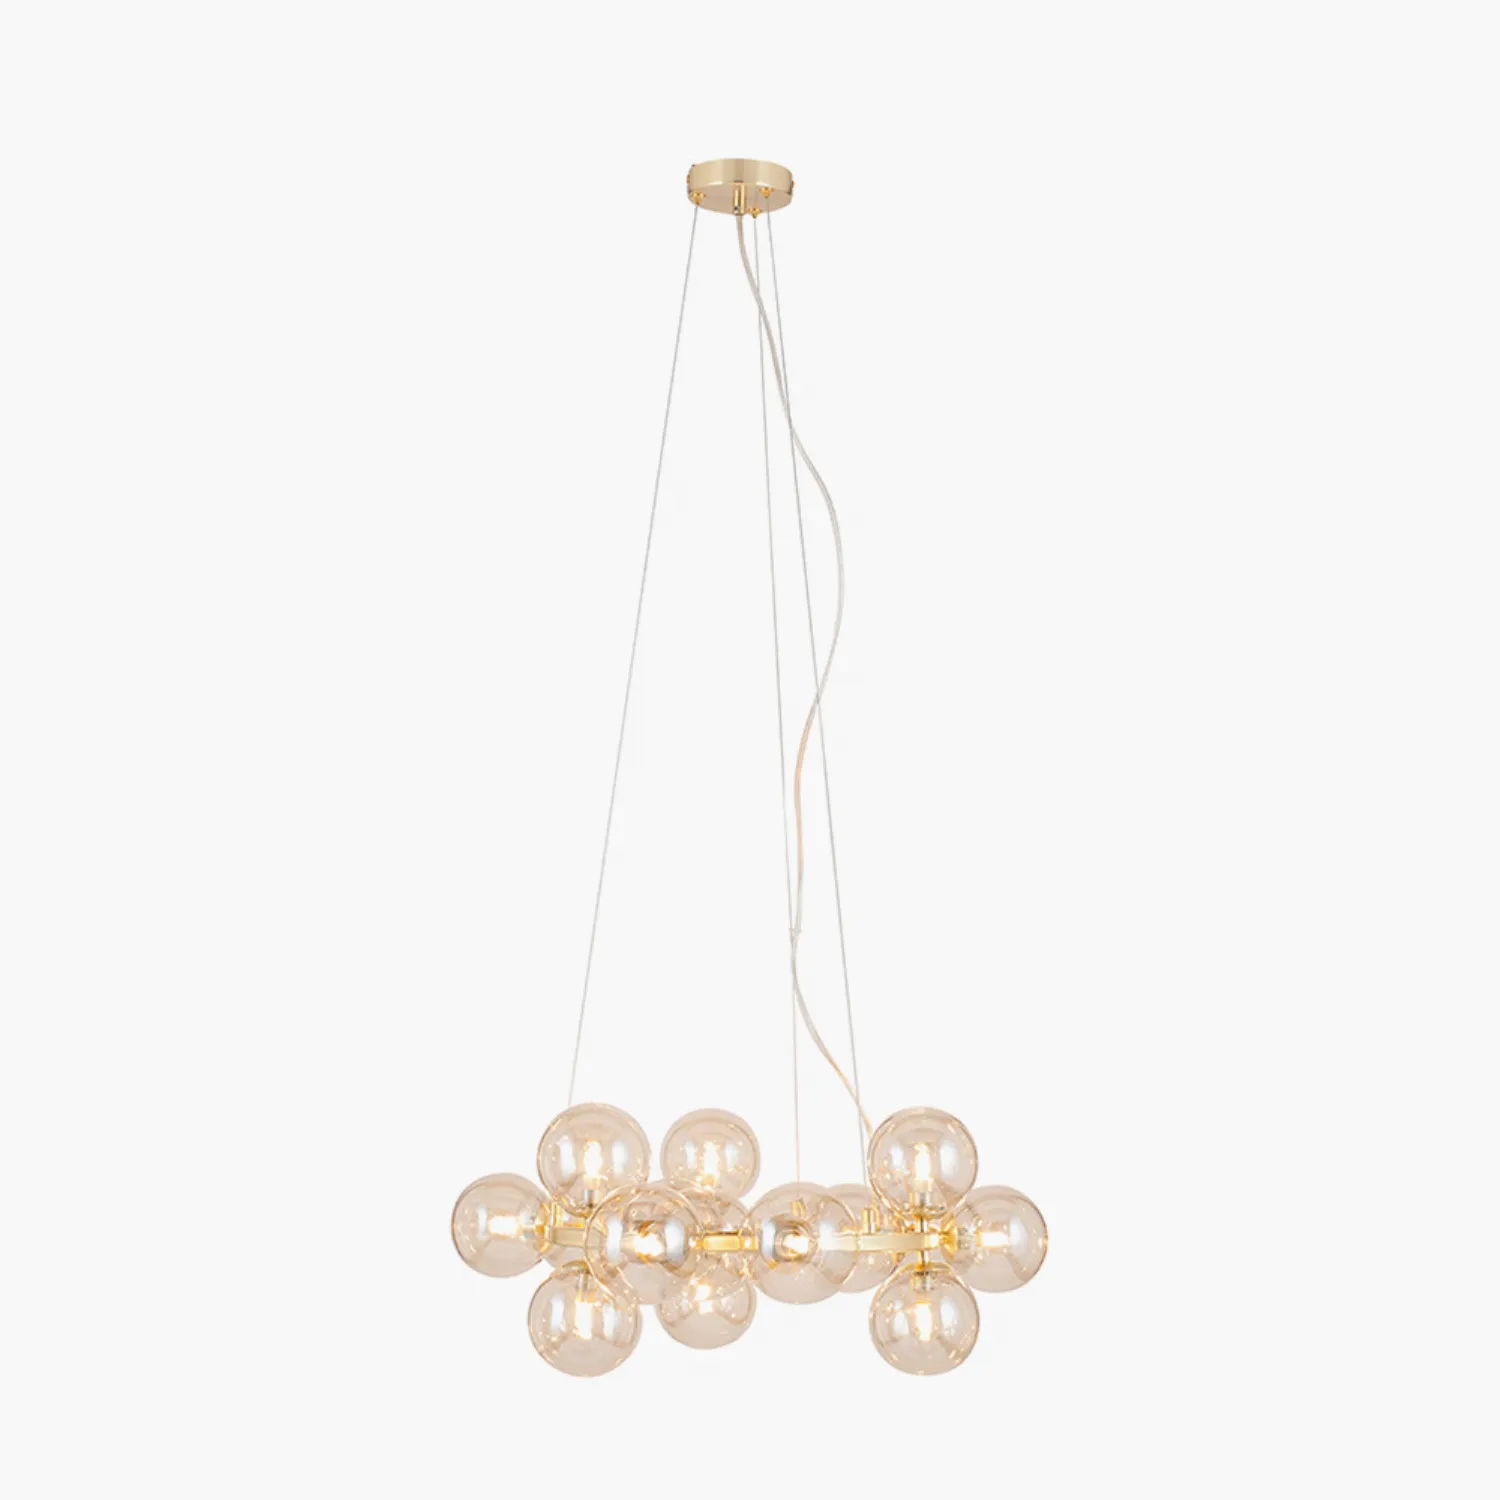 Gold Metal Pendant Ceiling Light with 15 Lustre Glass Balls